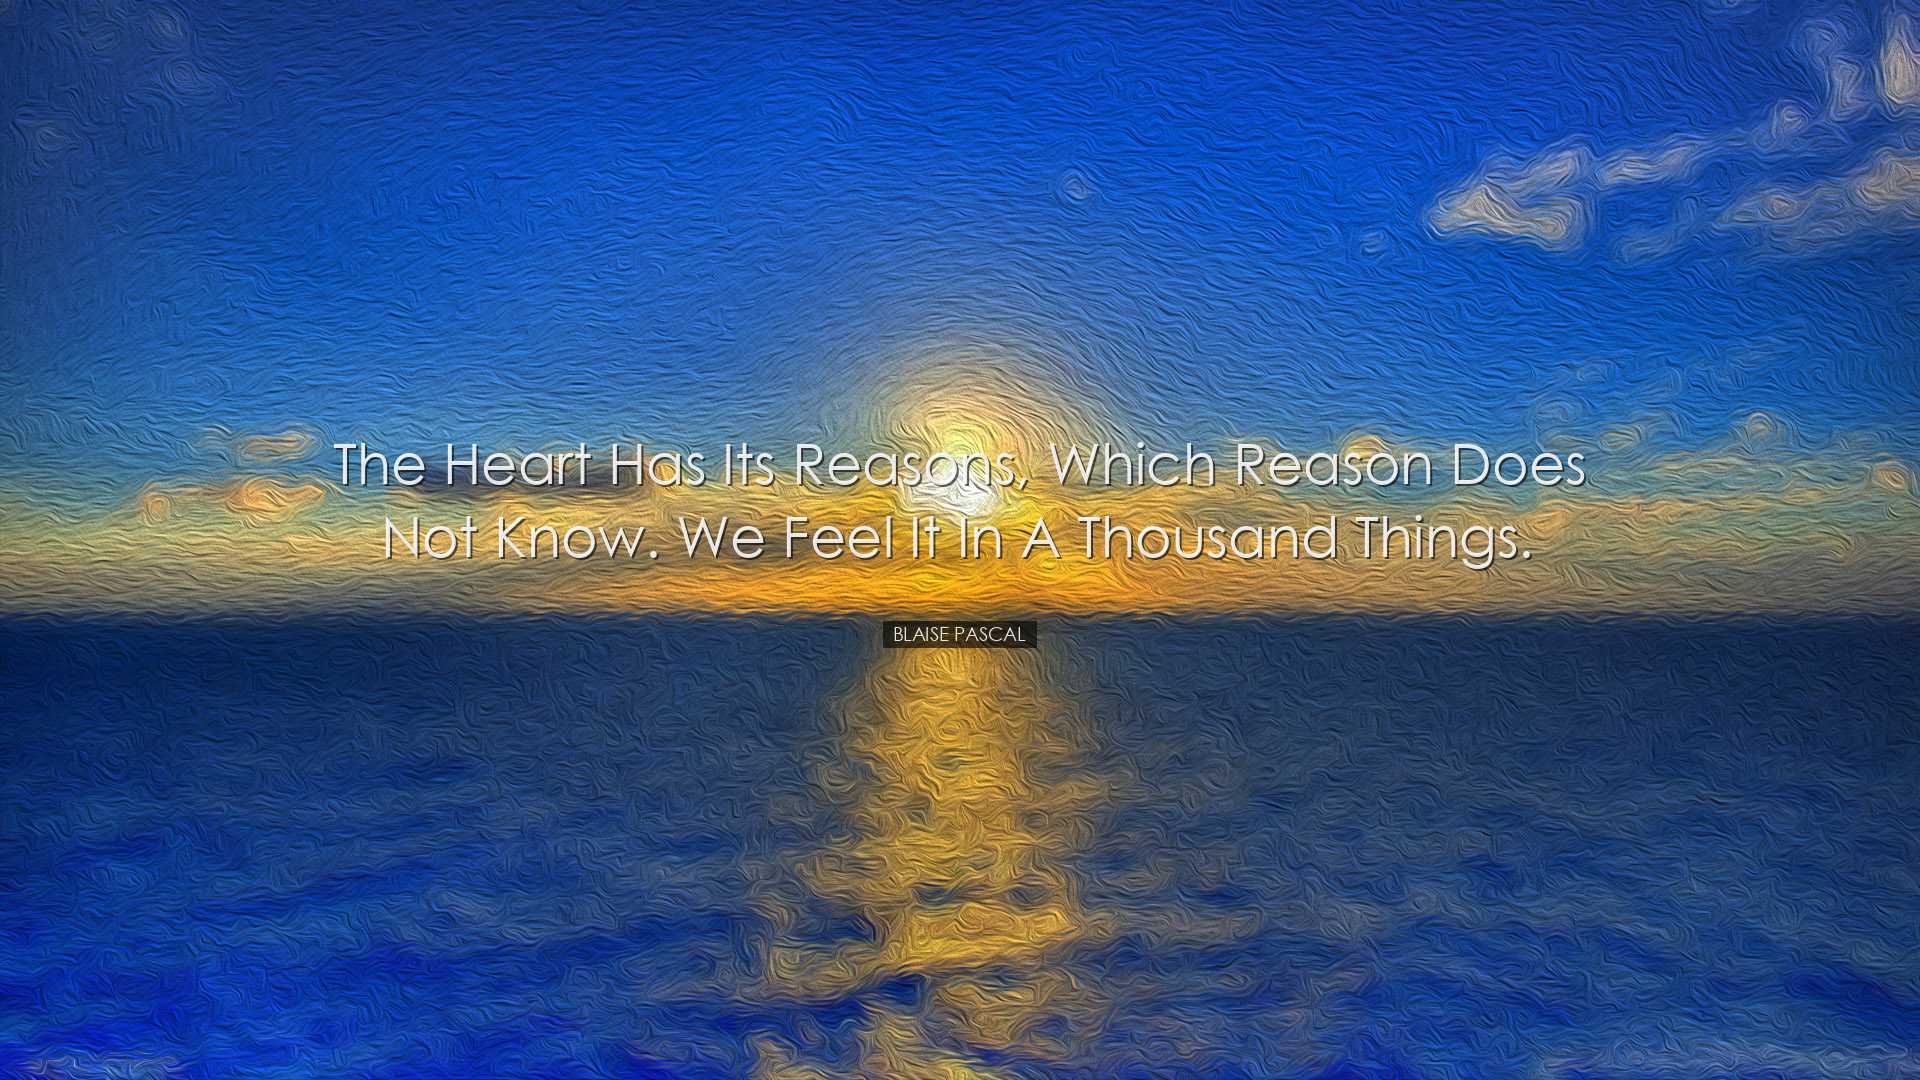 The heart has its reasons, which reason does not know. We feel it